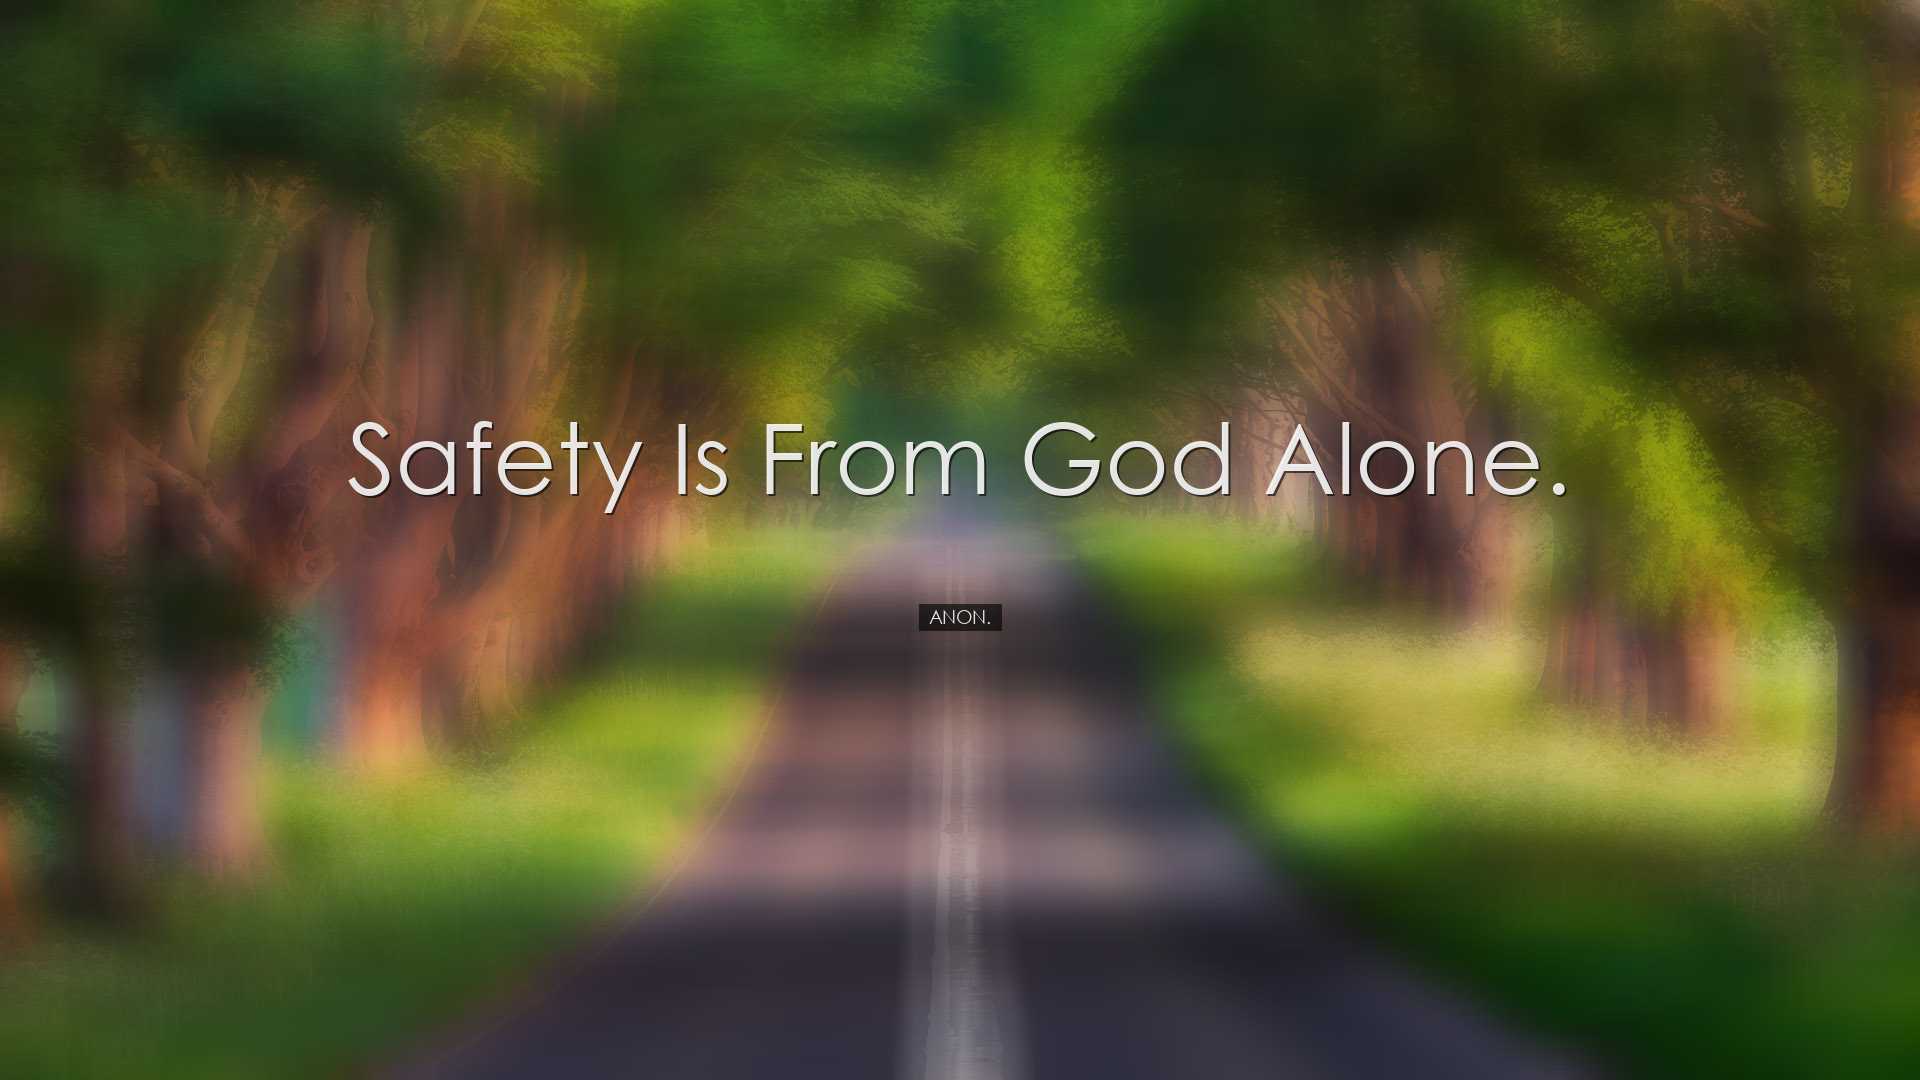 Safety is from God alone. - Anon.